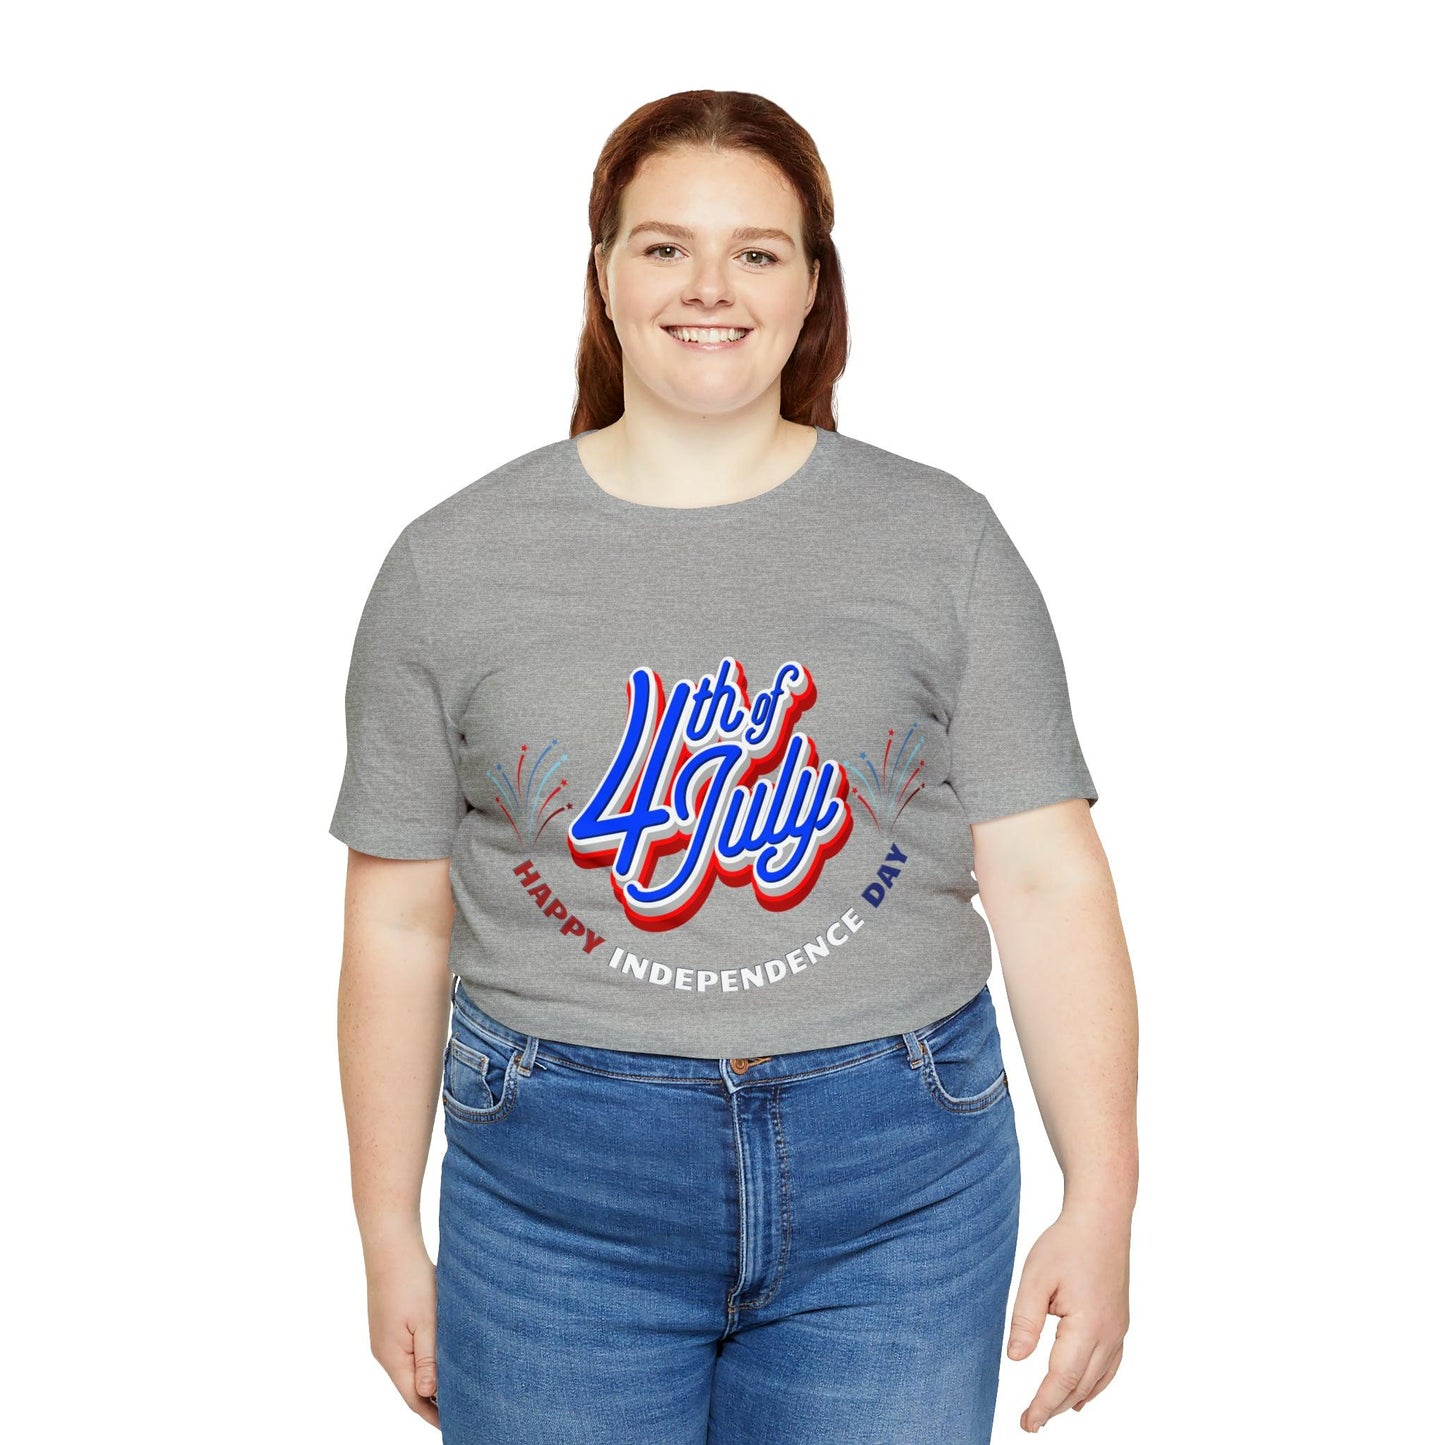 Celebrate Freedom with Patriotic Shirts: Happy Independence Day Shirt for Women and Men, USA Flag, Fireworks, and Freedom-inspired Designs - Giftsmojo